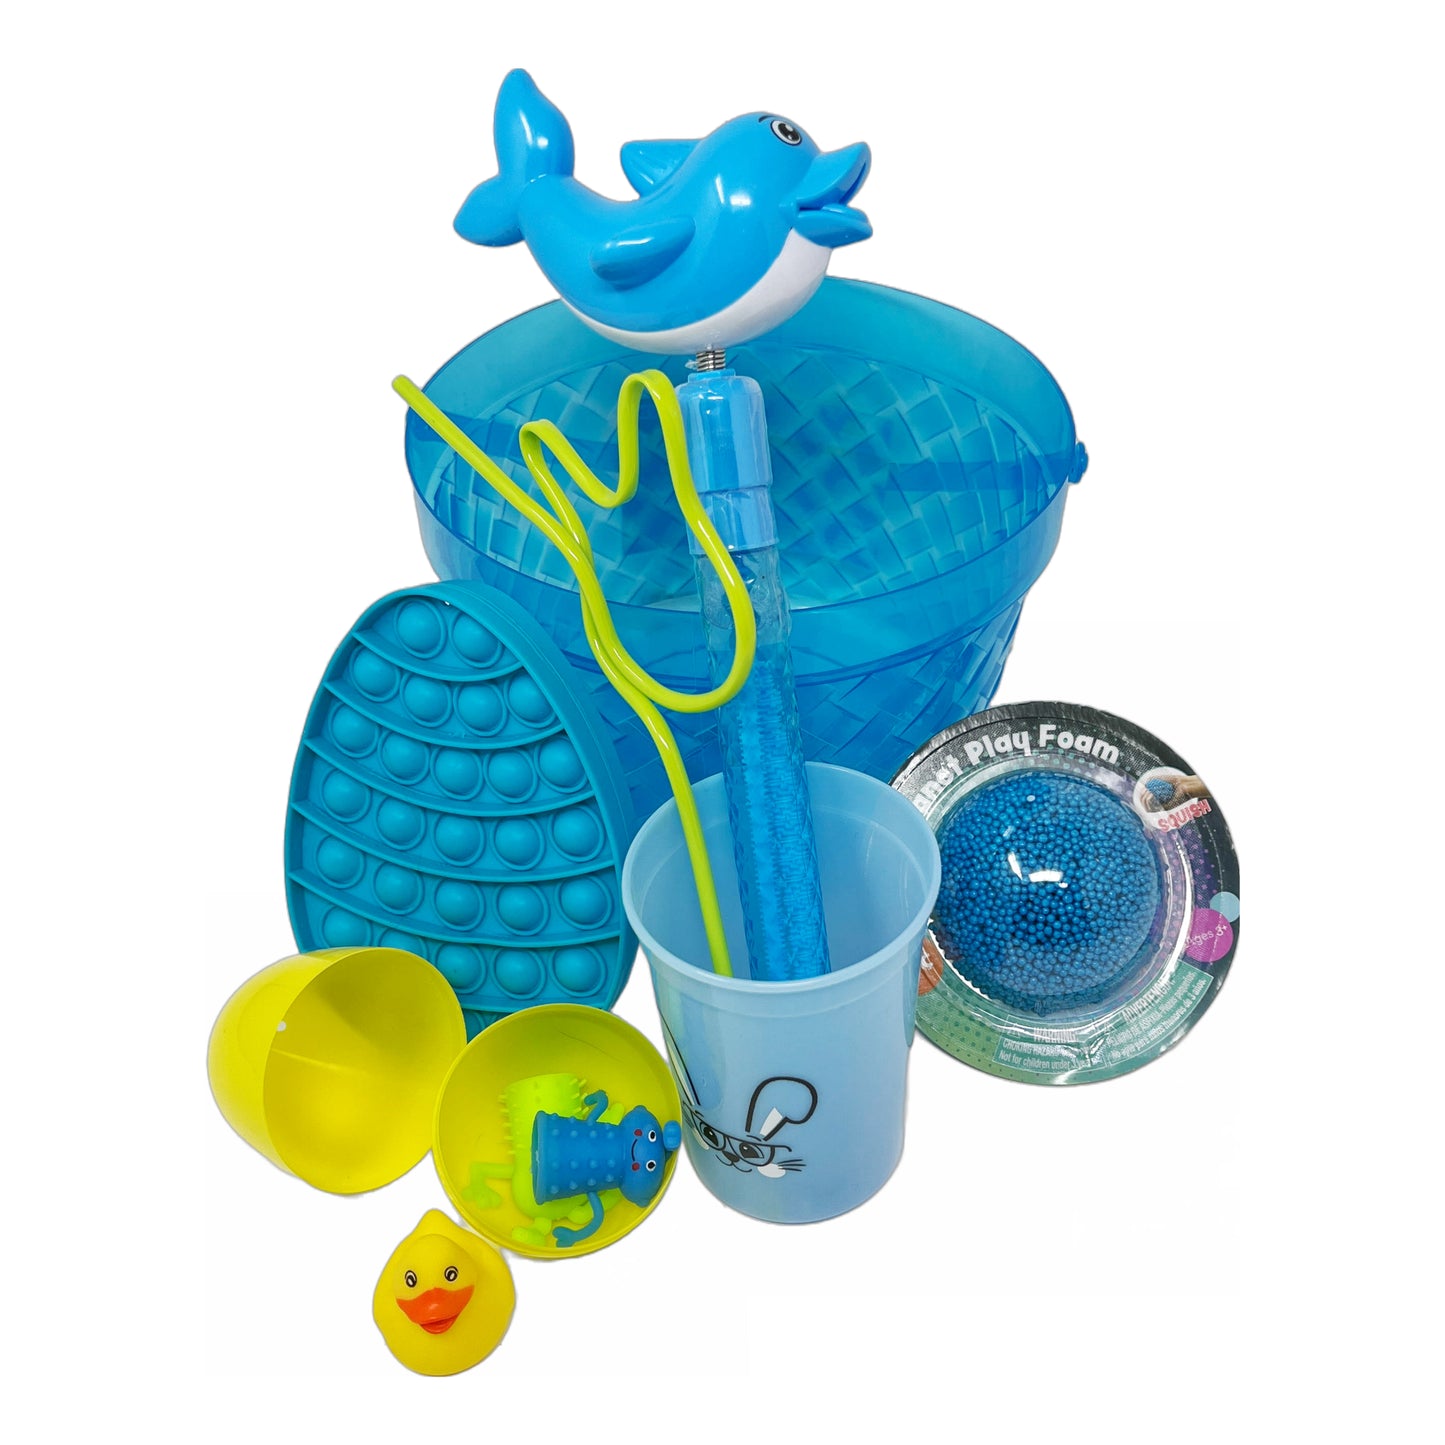 Cheep N Cheerful Boys LED Easter Basket Kit, Light Up Easter Basket with Novelty Toys, Easter Gift